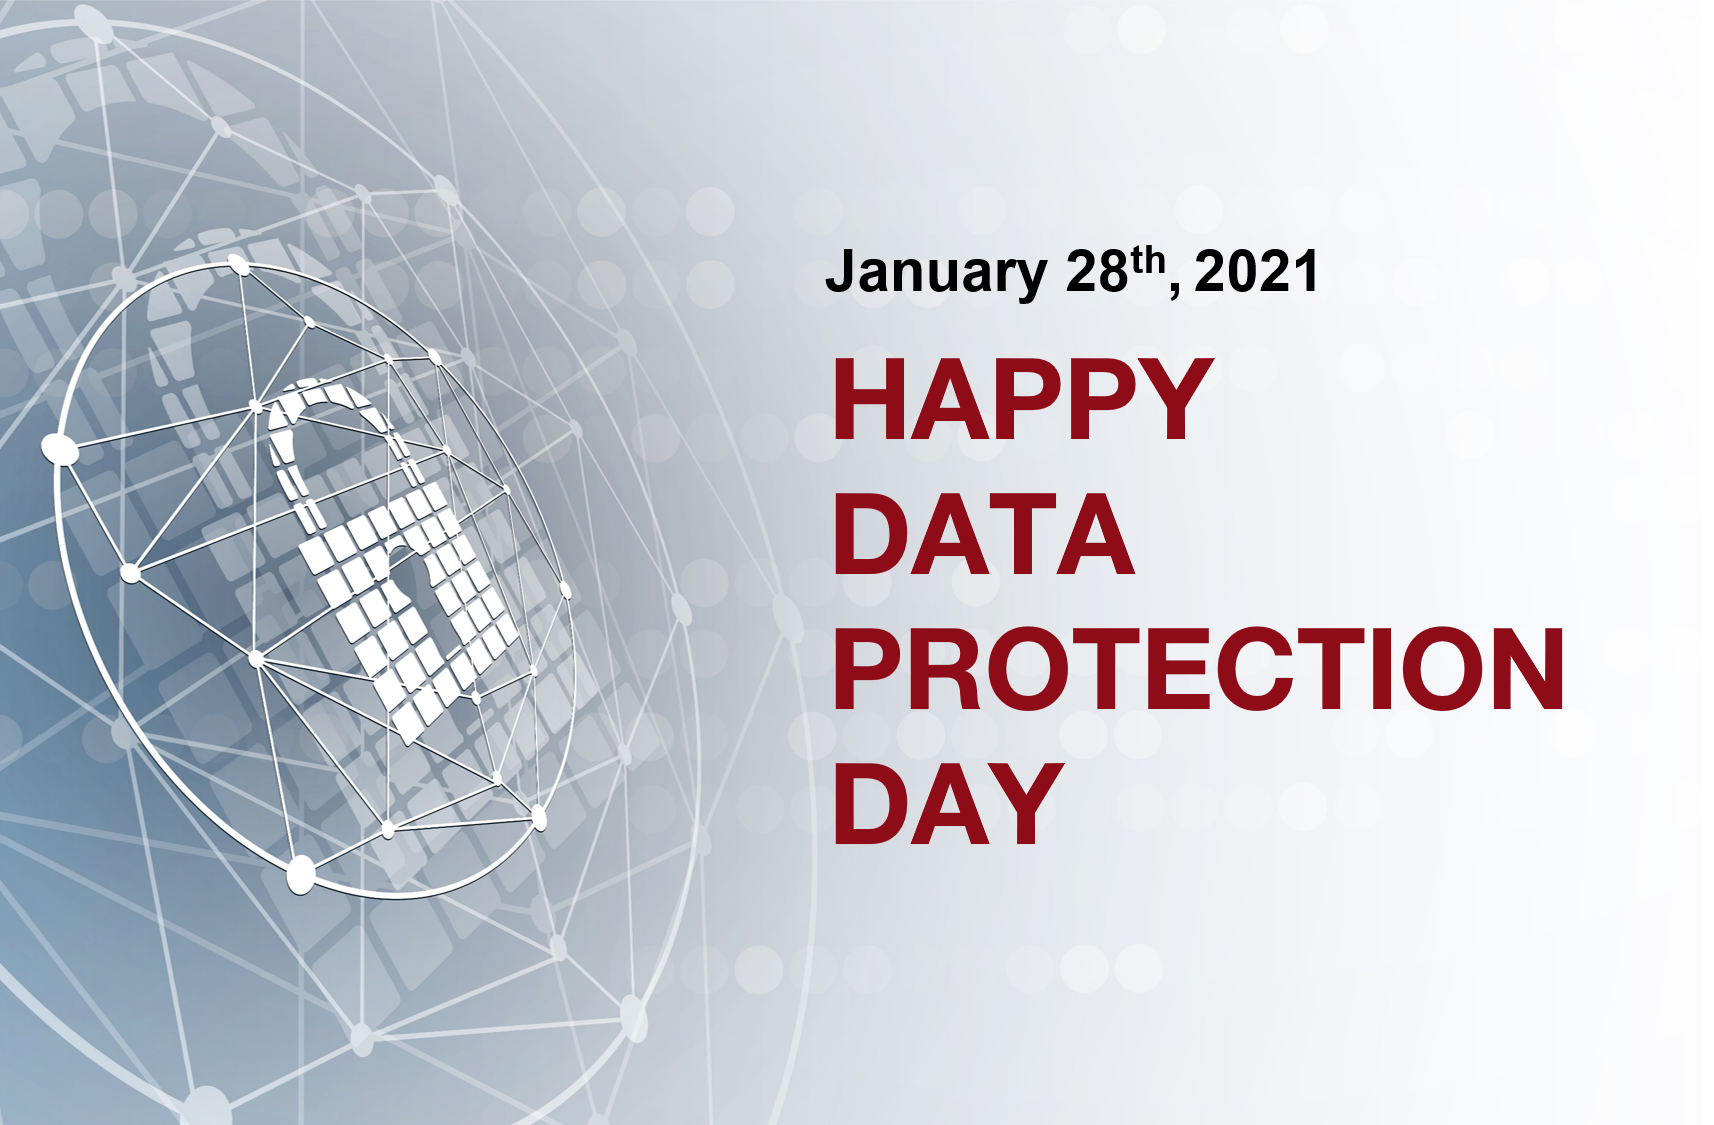 Happy Data Protection Day, 28th of January 2021